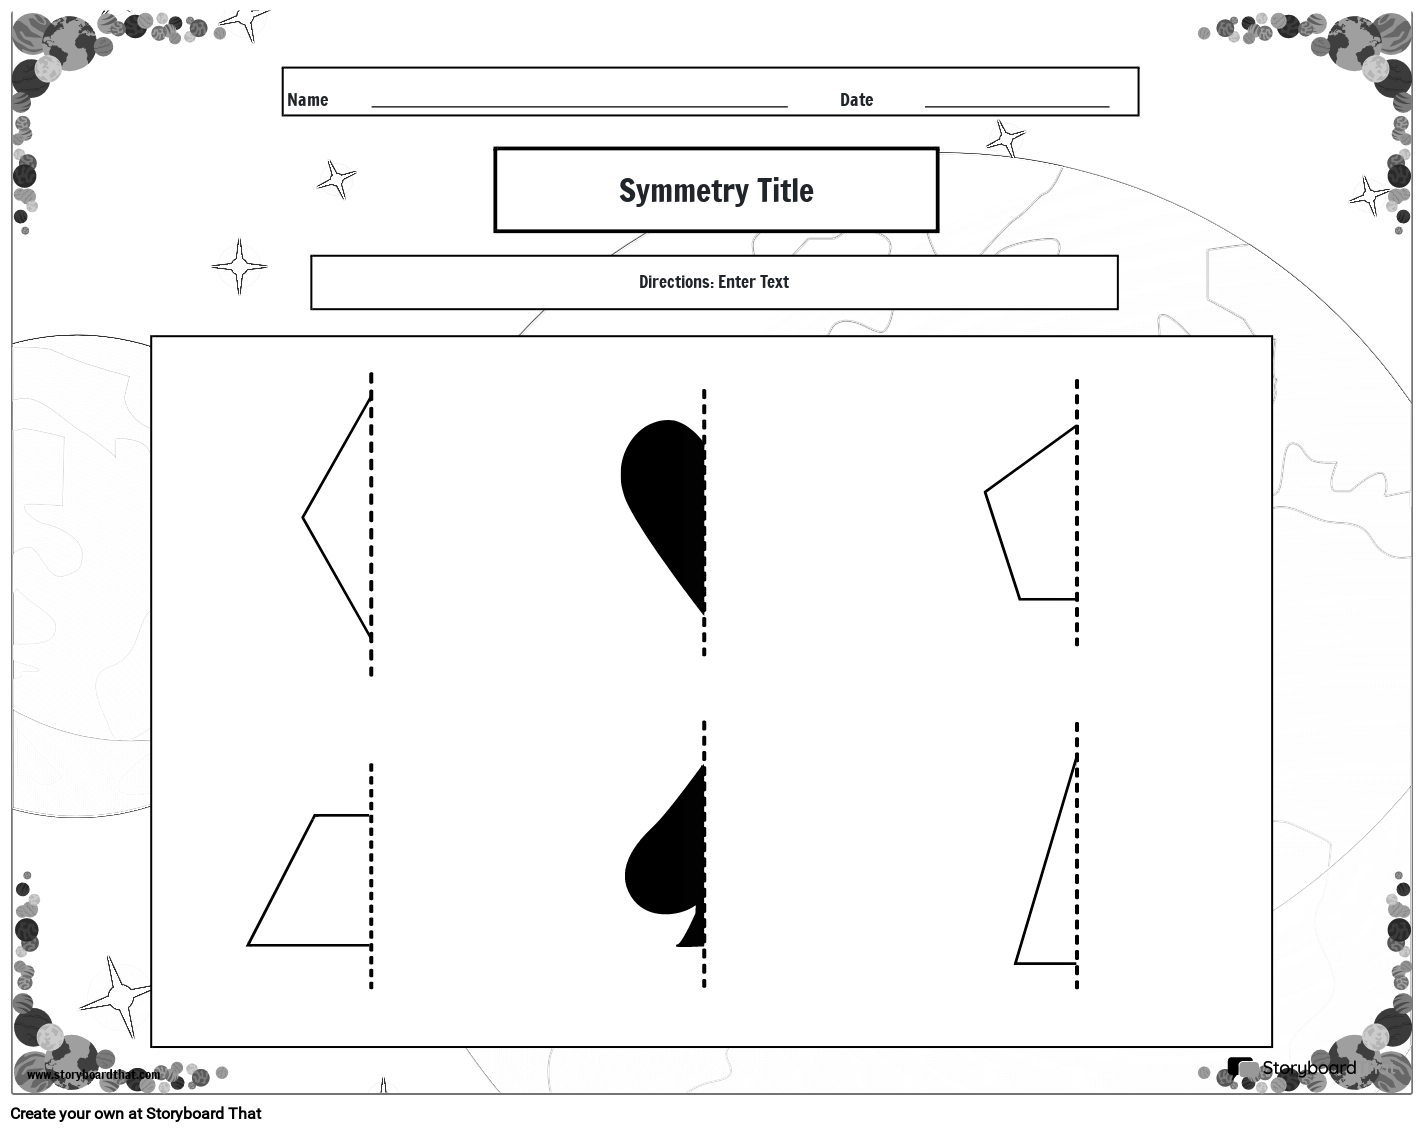 Space symmetry colouring worksheets